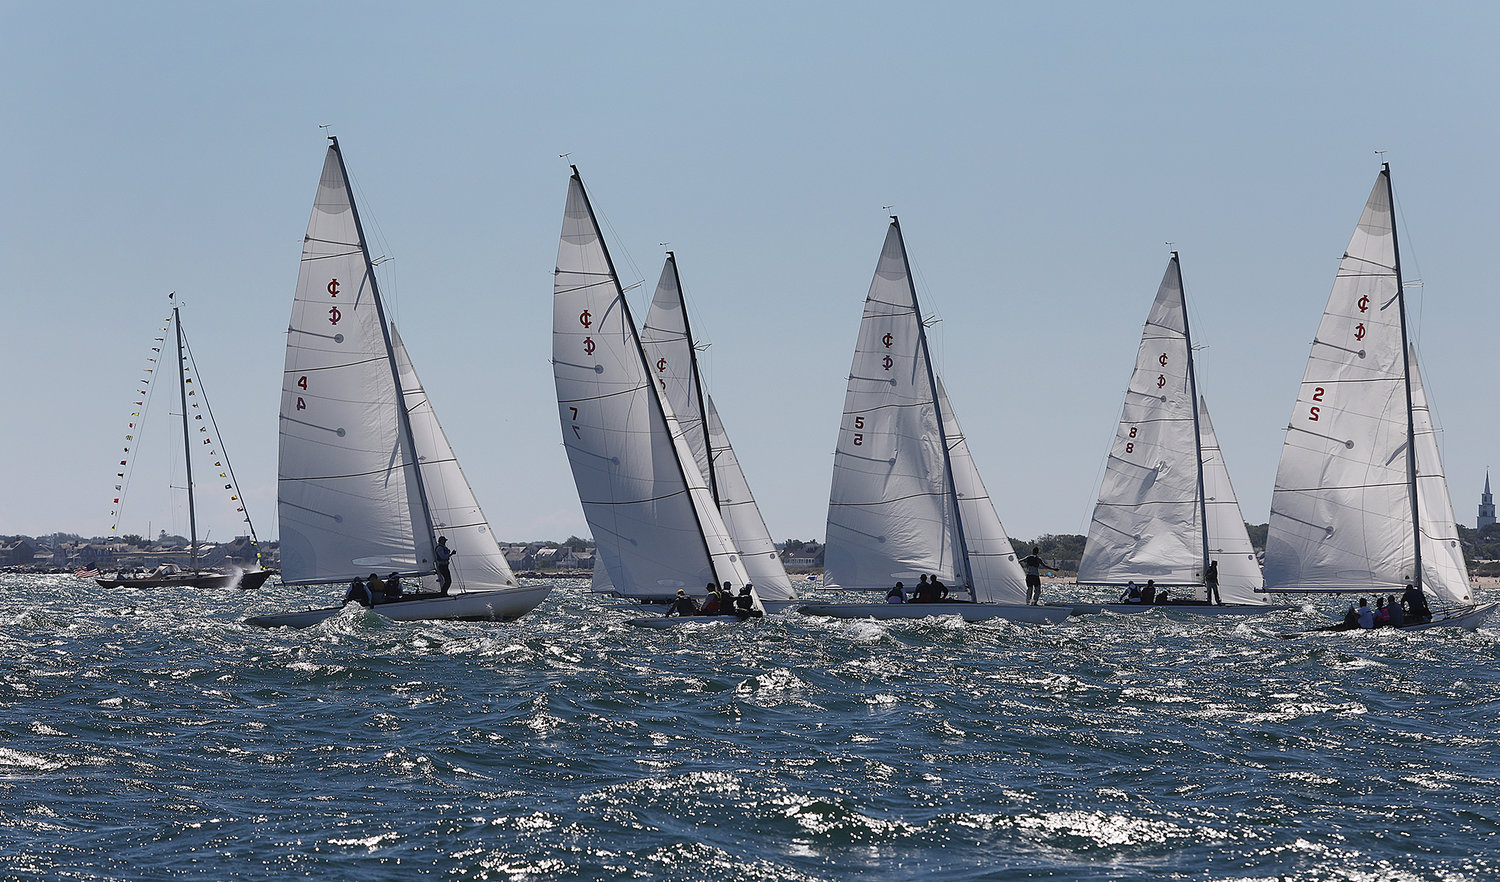 AUGUST 18, 2022 -- Nantucket Race Week. Day 6. Boats race during the International One Design Celebrity Invitational in Nantucket Sound on Thursday. Photo by Ray K. Saunders